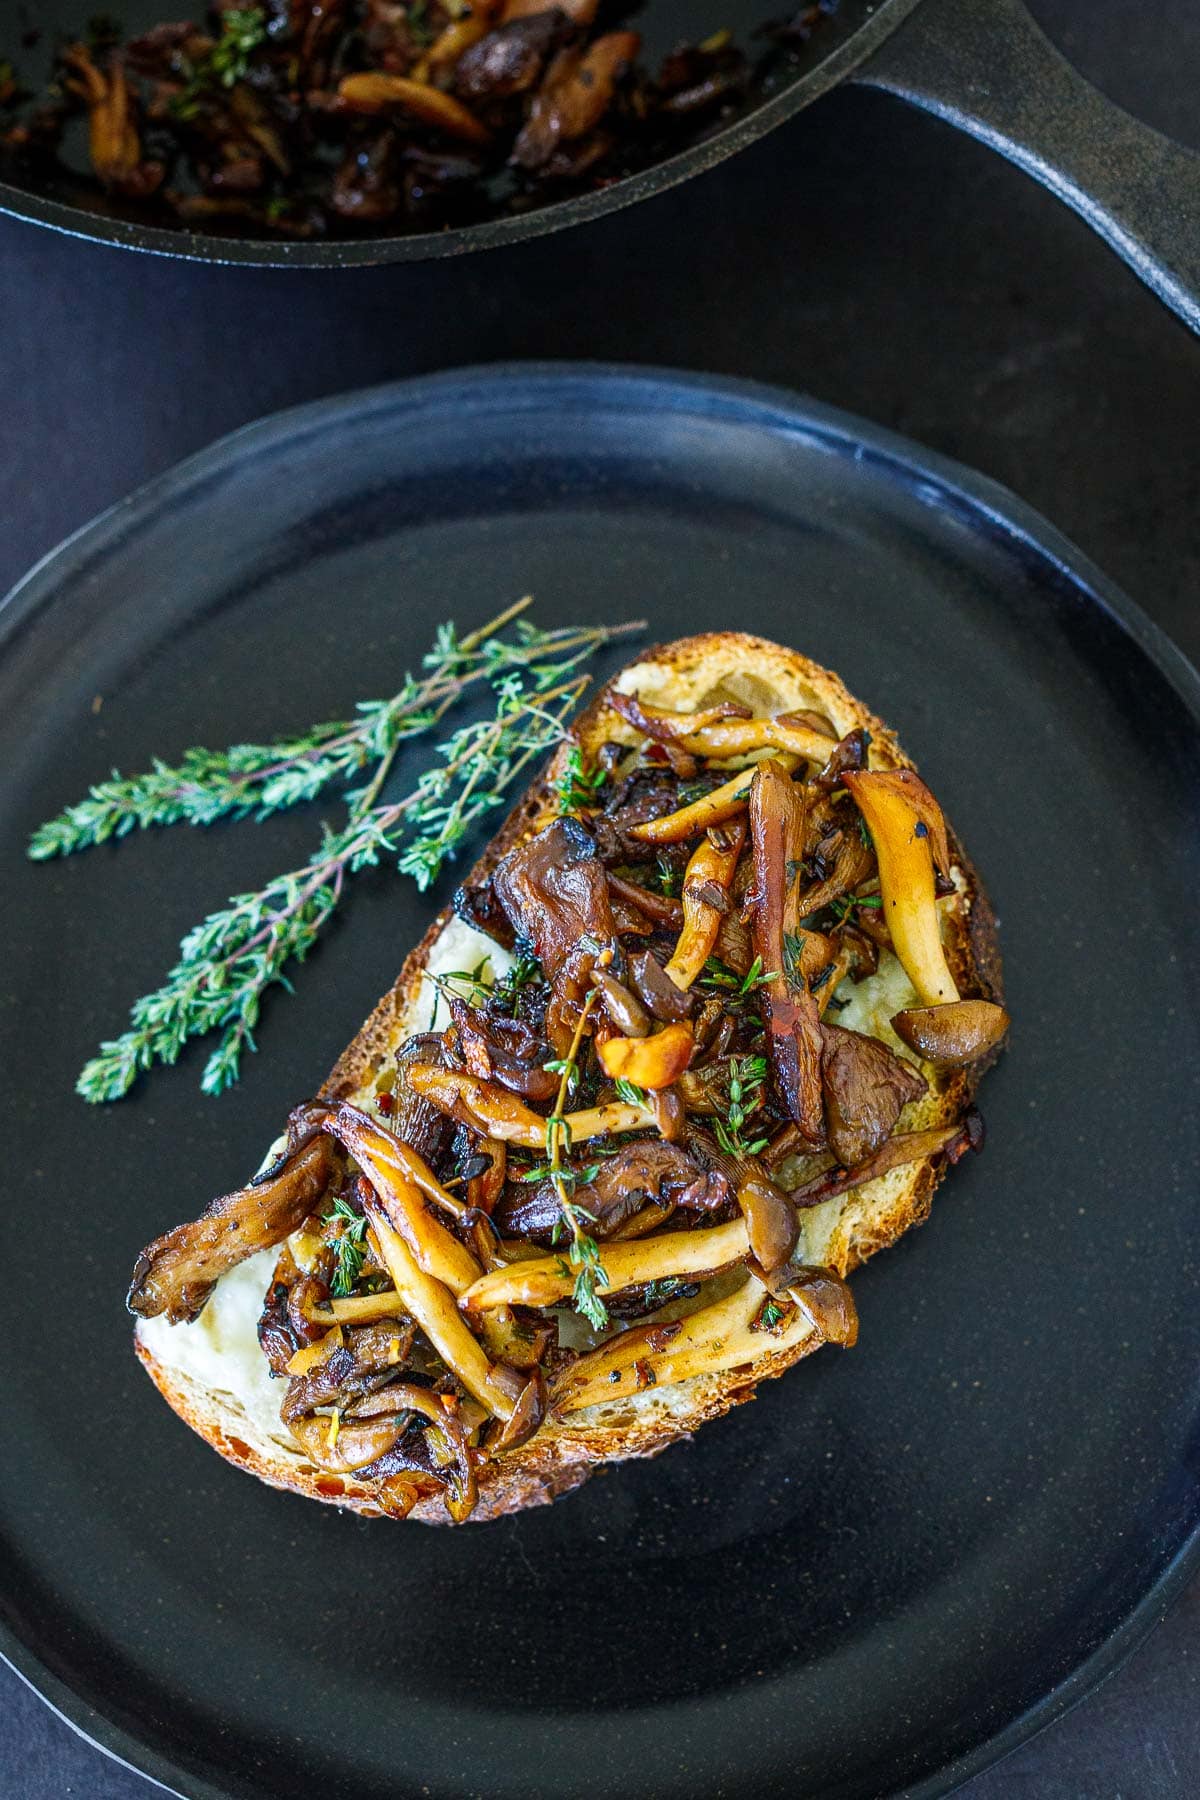 mushroom toast with wild mixed mushrooms, melted cheese underneath, garnished with fresh thyme.